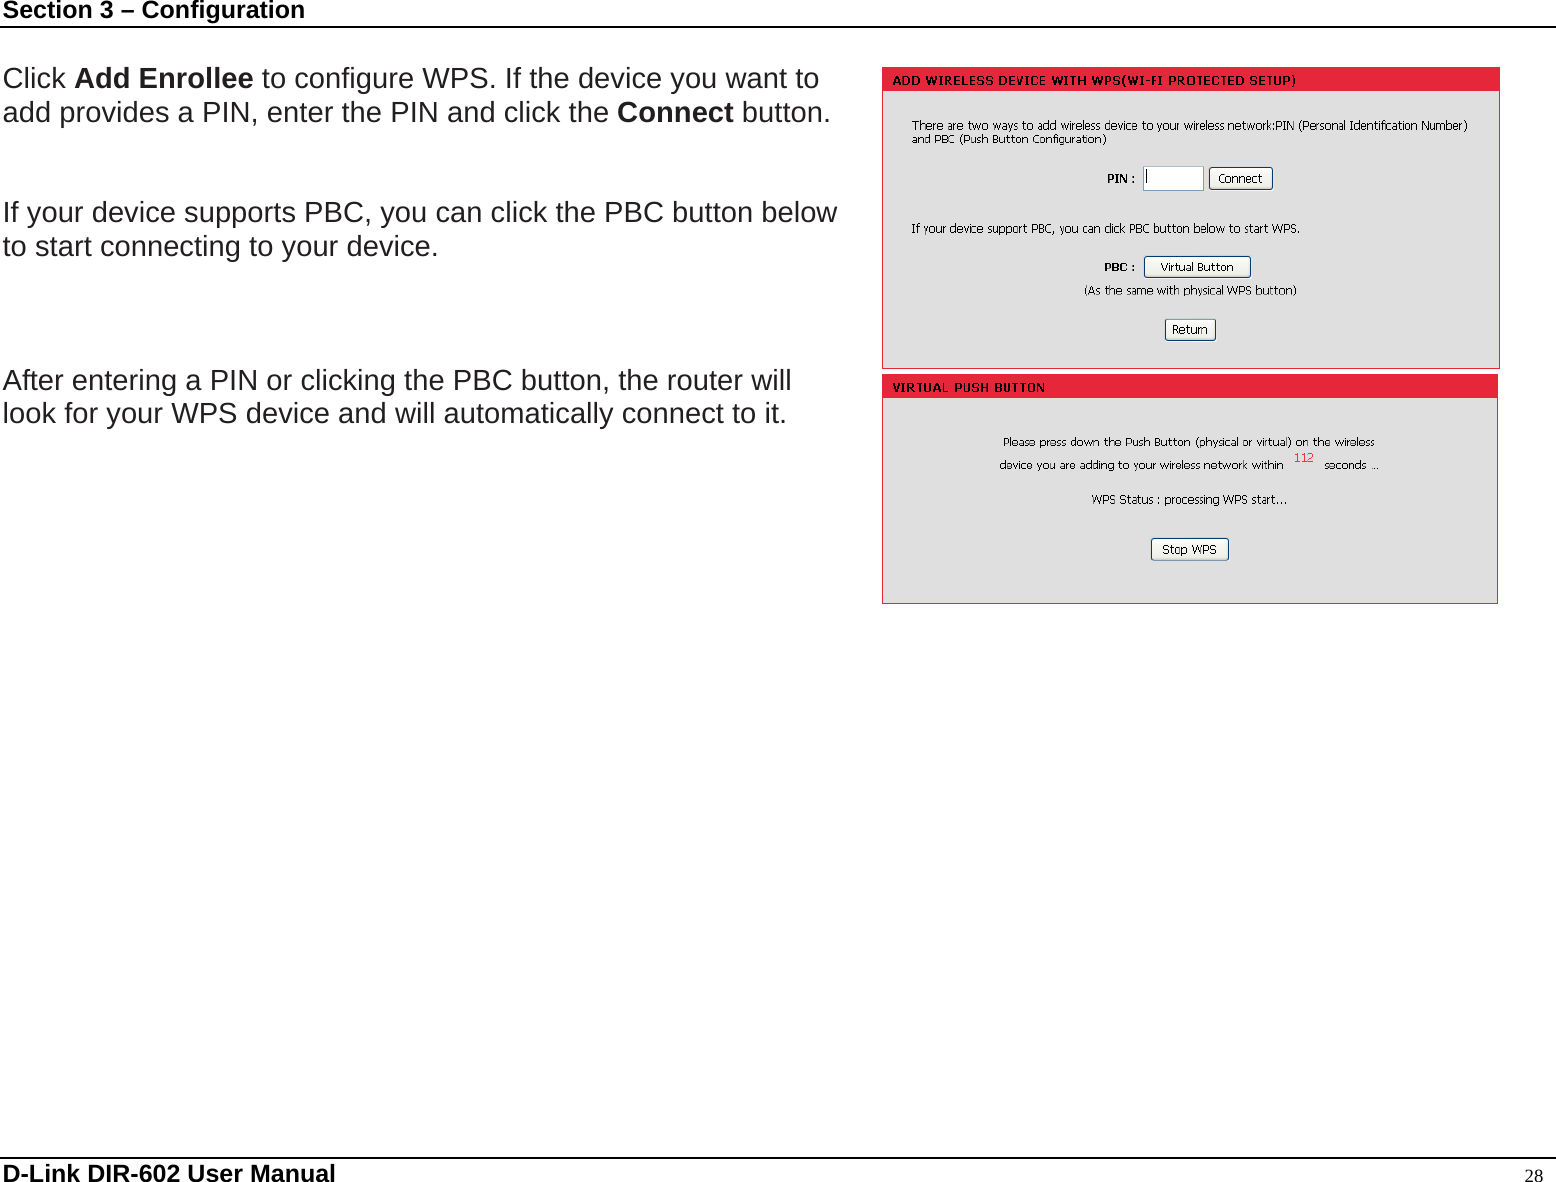 Section 3 – Configuration  Click Add Enrollee to configure WPS. If the device you want to   add provides a PIN, enter the PIN and click the Connect button.   If your device supports PBC, you can click the PBC button below to start connecting to your device.    After entering a PIN or clicking the PBC button, the router will   look for your WPS device and will automatically connect to it.   D-Link DIR-602 User Manual                                                                                               28 